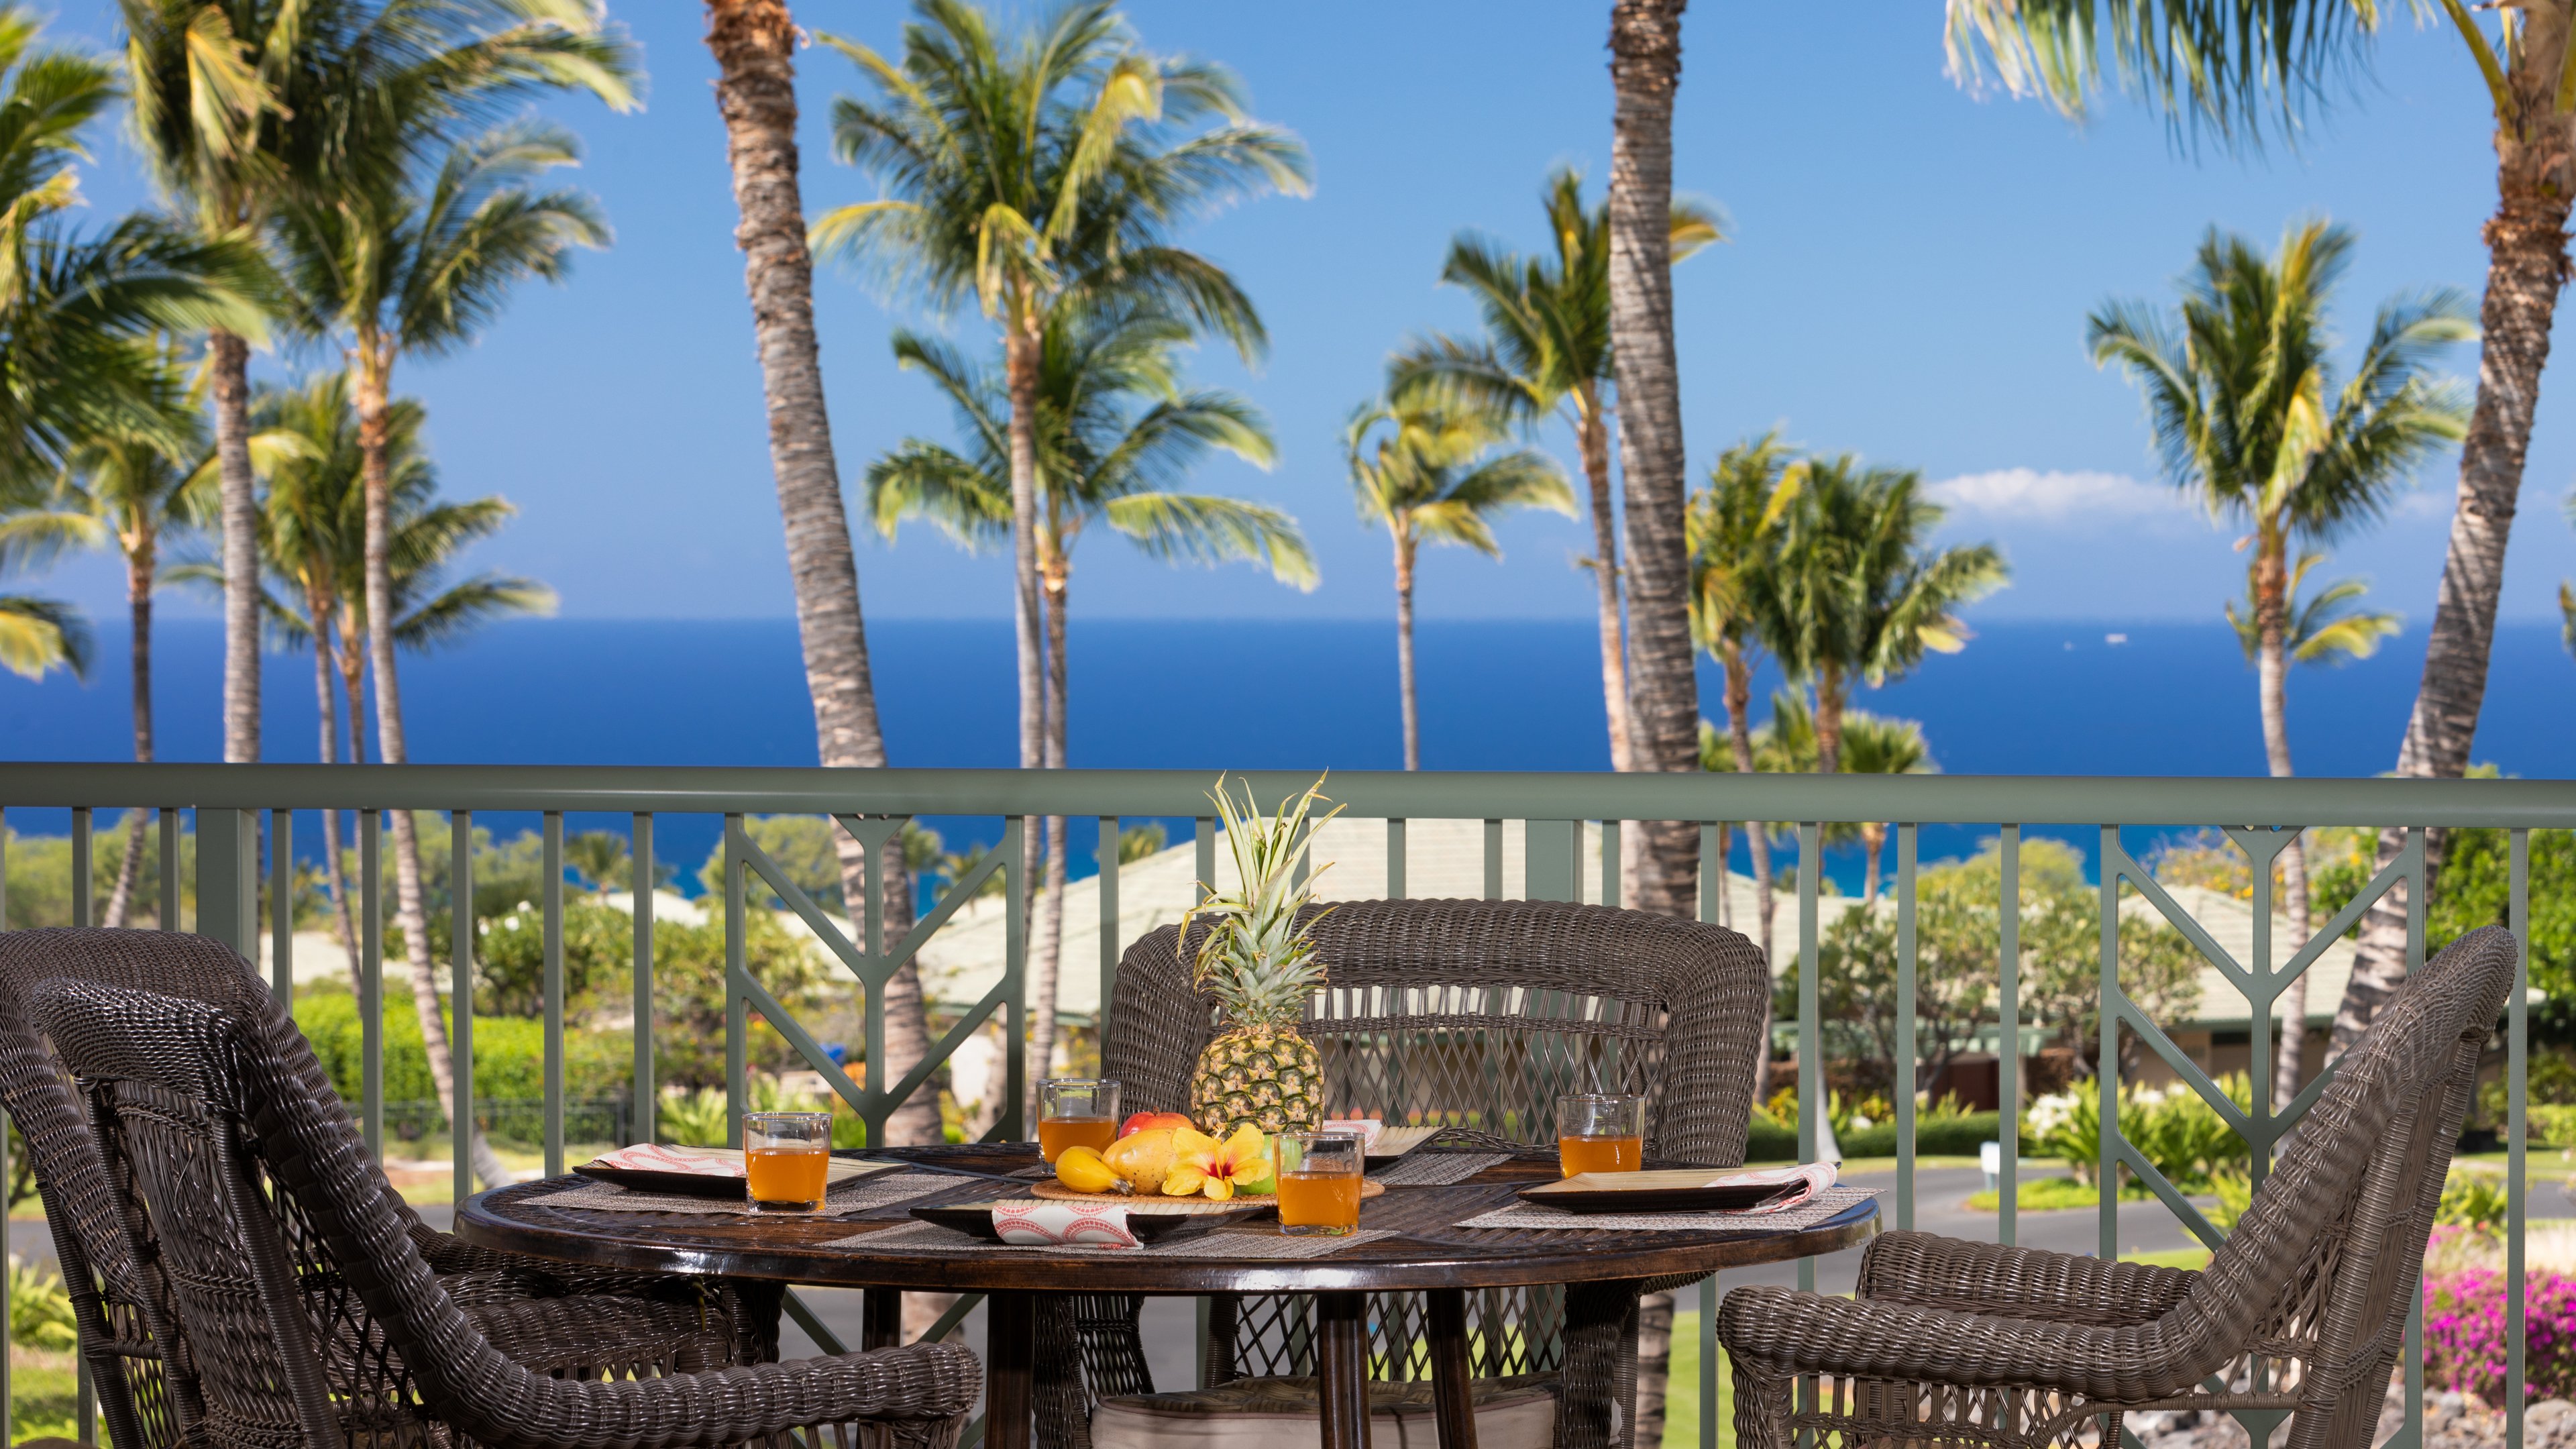 Welcome to Ocean Palms Villa - Wai'ula'ula home with an outstanding view of the ocean and community